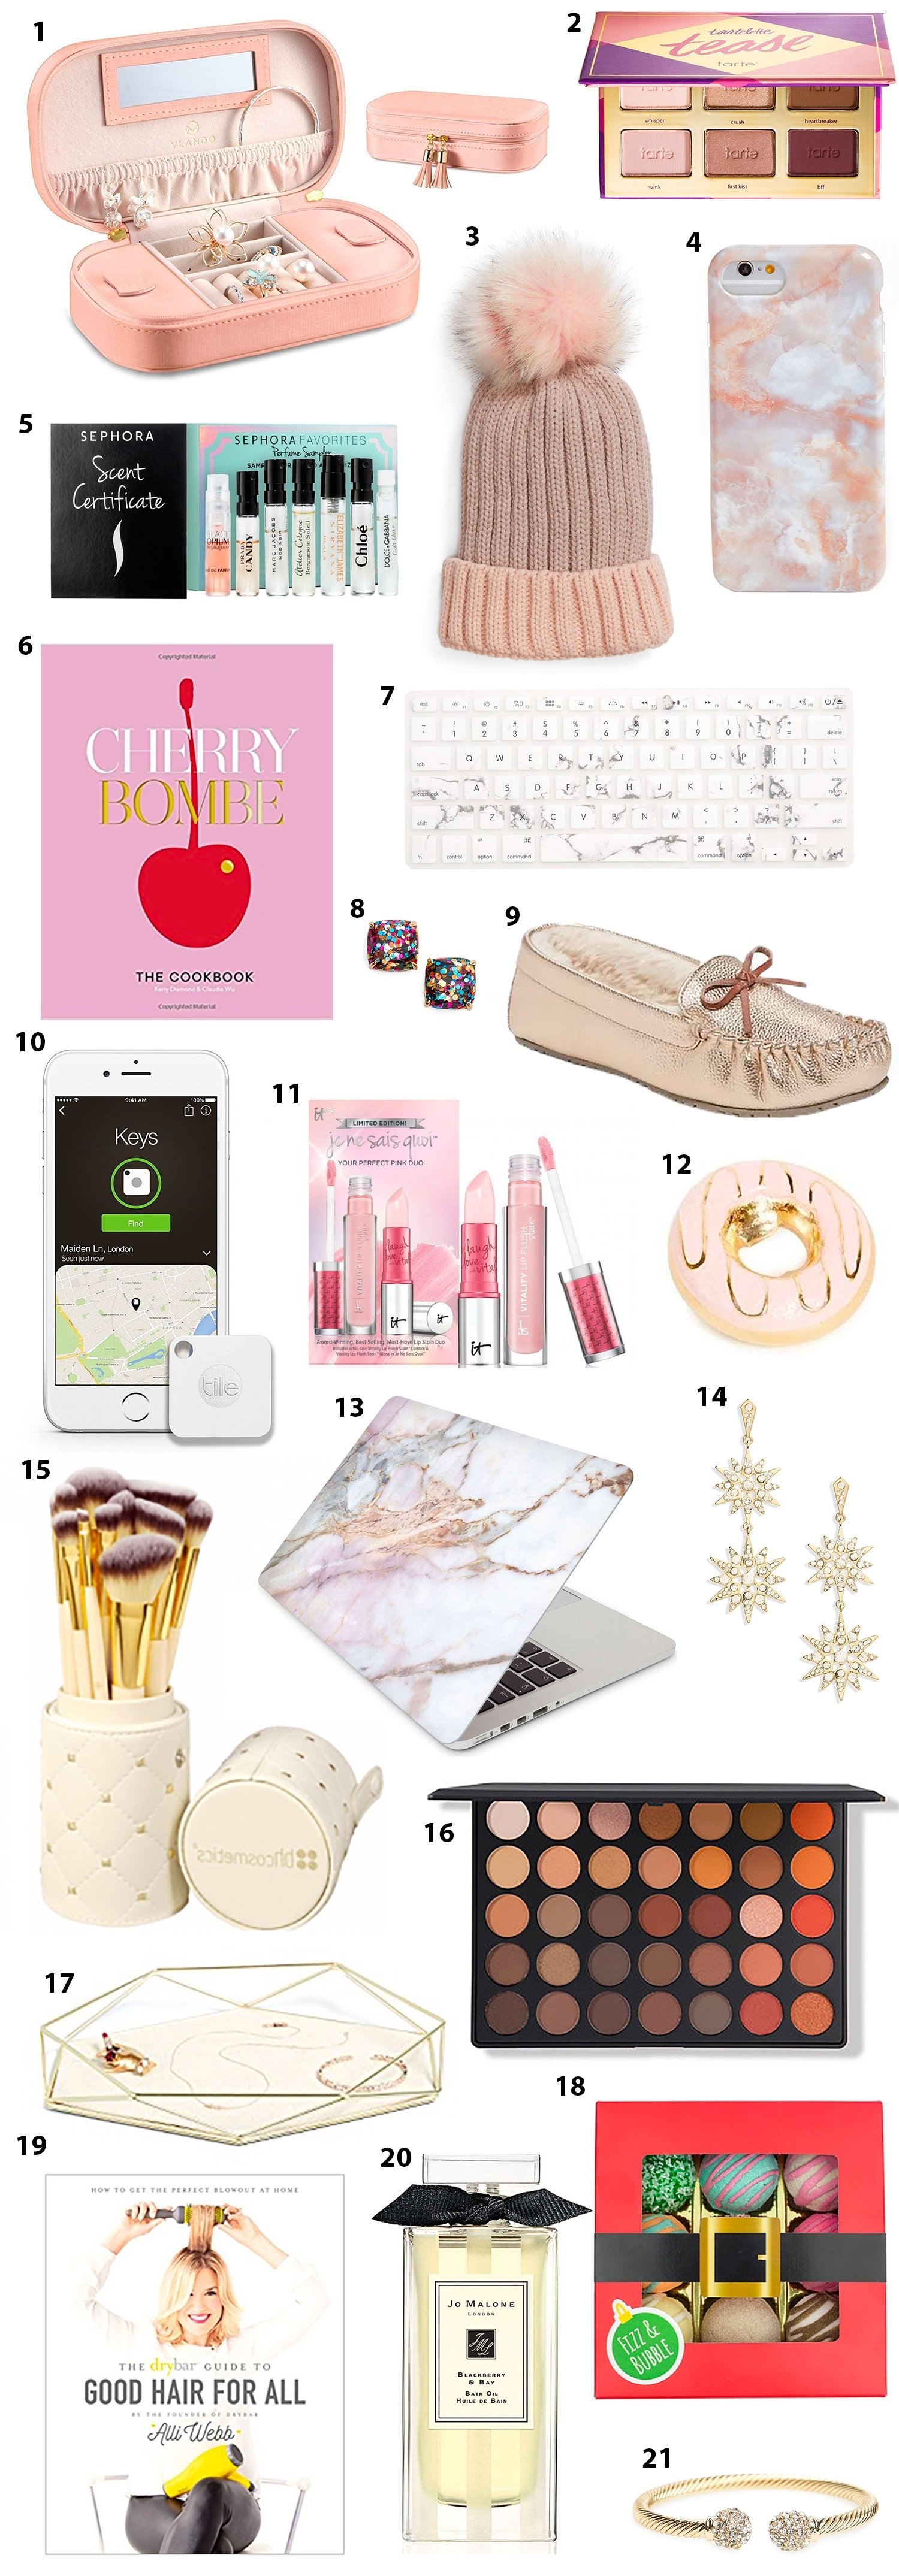 10 Unique Gift Ideas Under 25 Dollars the best christmas gifts for women under 25 ashley brooke nicholas 2022